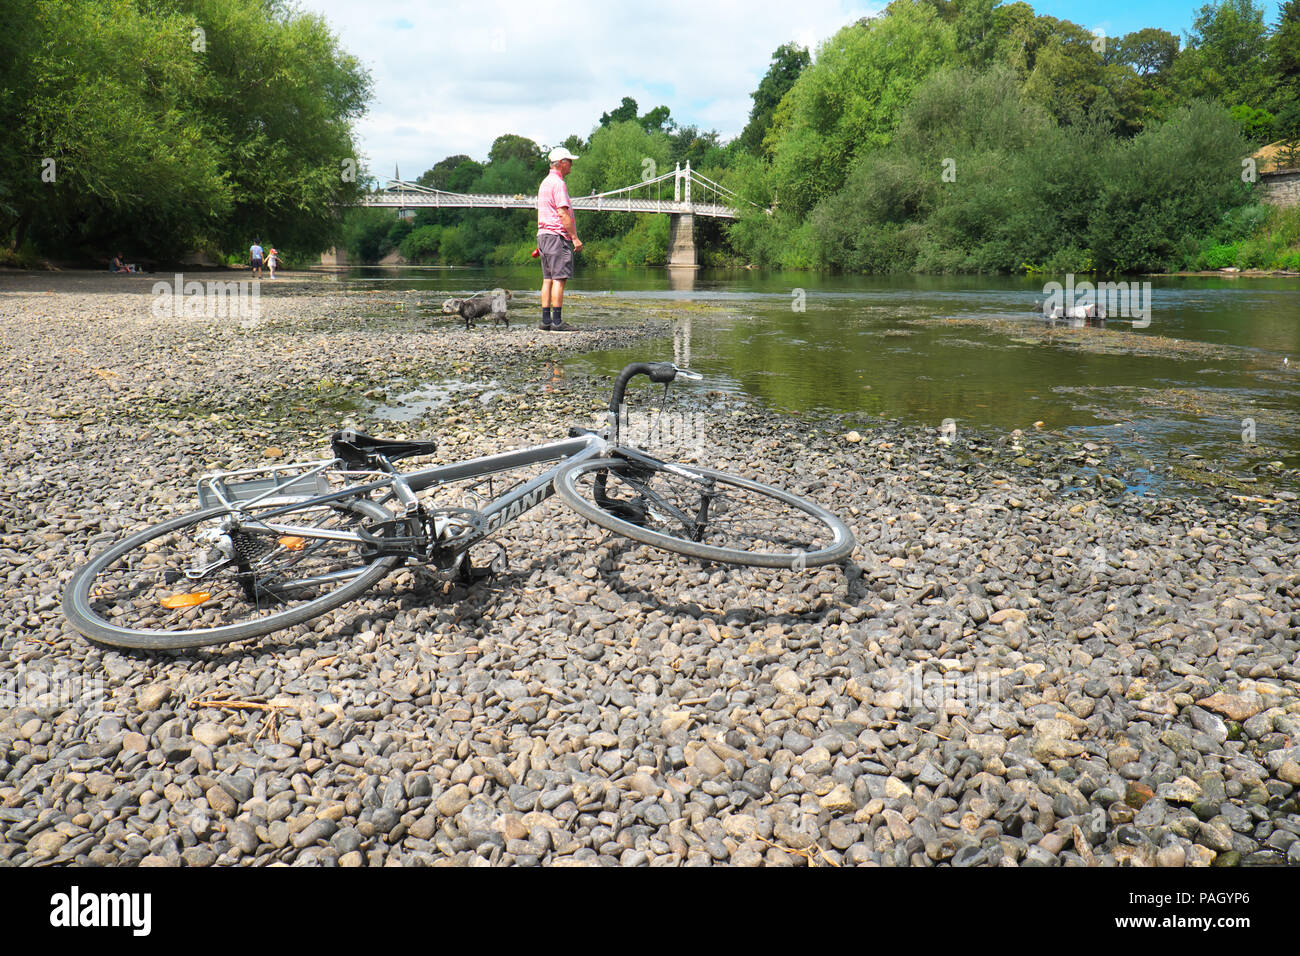 River Wye, Hereford, Herefordshire, UK - UK Weather - Monday 23rd July 2018 - Man walks his dogs whilst others cycled along an exposed shoreline of the River Wye as it passes under the pedestrian Victoria Bridge in Hereford. The Environment Agency recorded todays river level on the Wye in Hereford as just 9cm which is well below the typical summer range. Photo Steven May / Alamy Live News Stock Photo